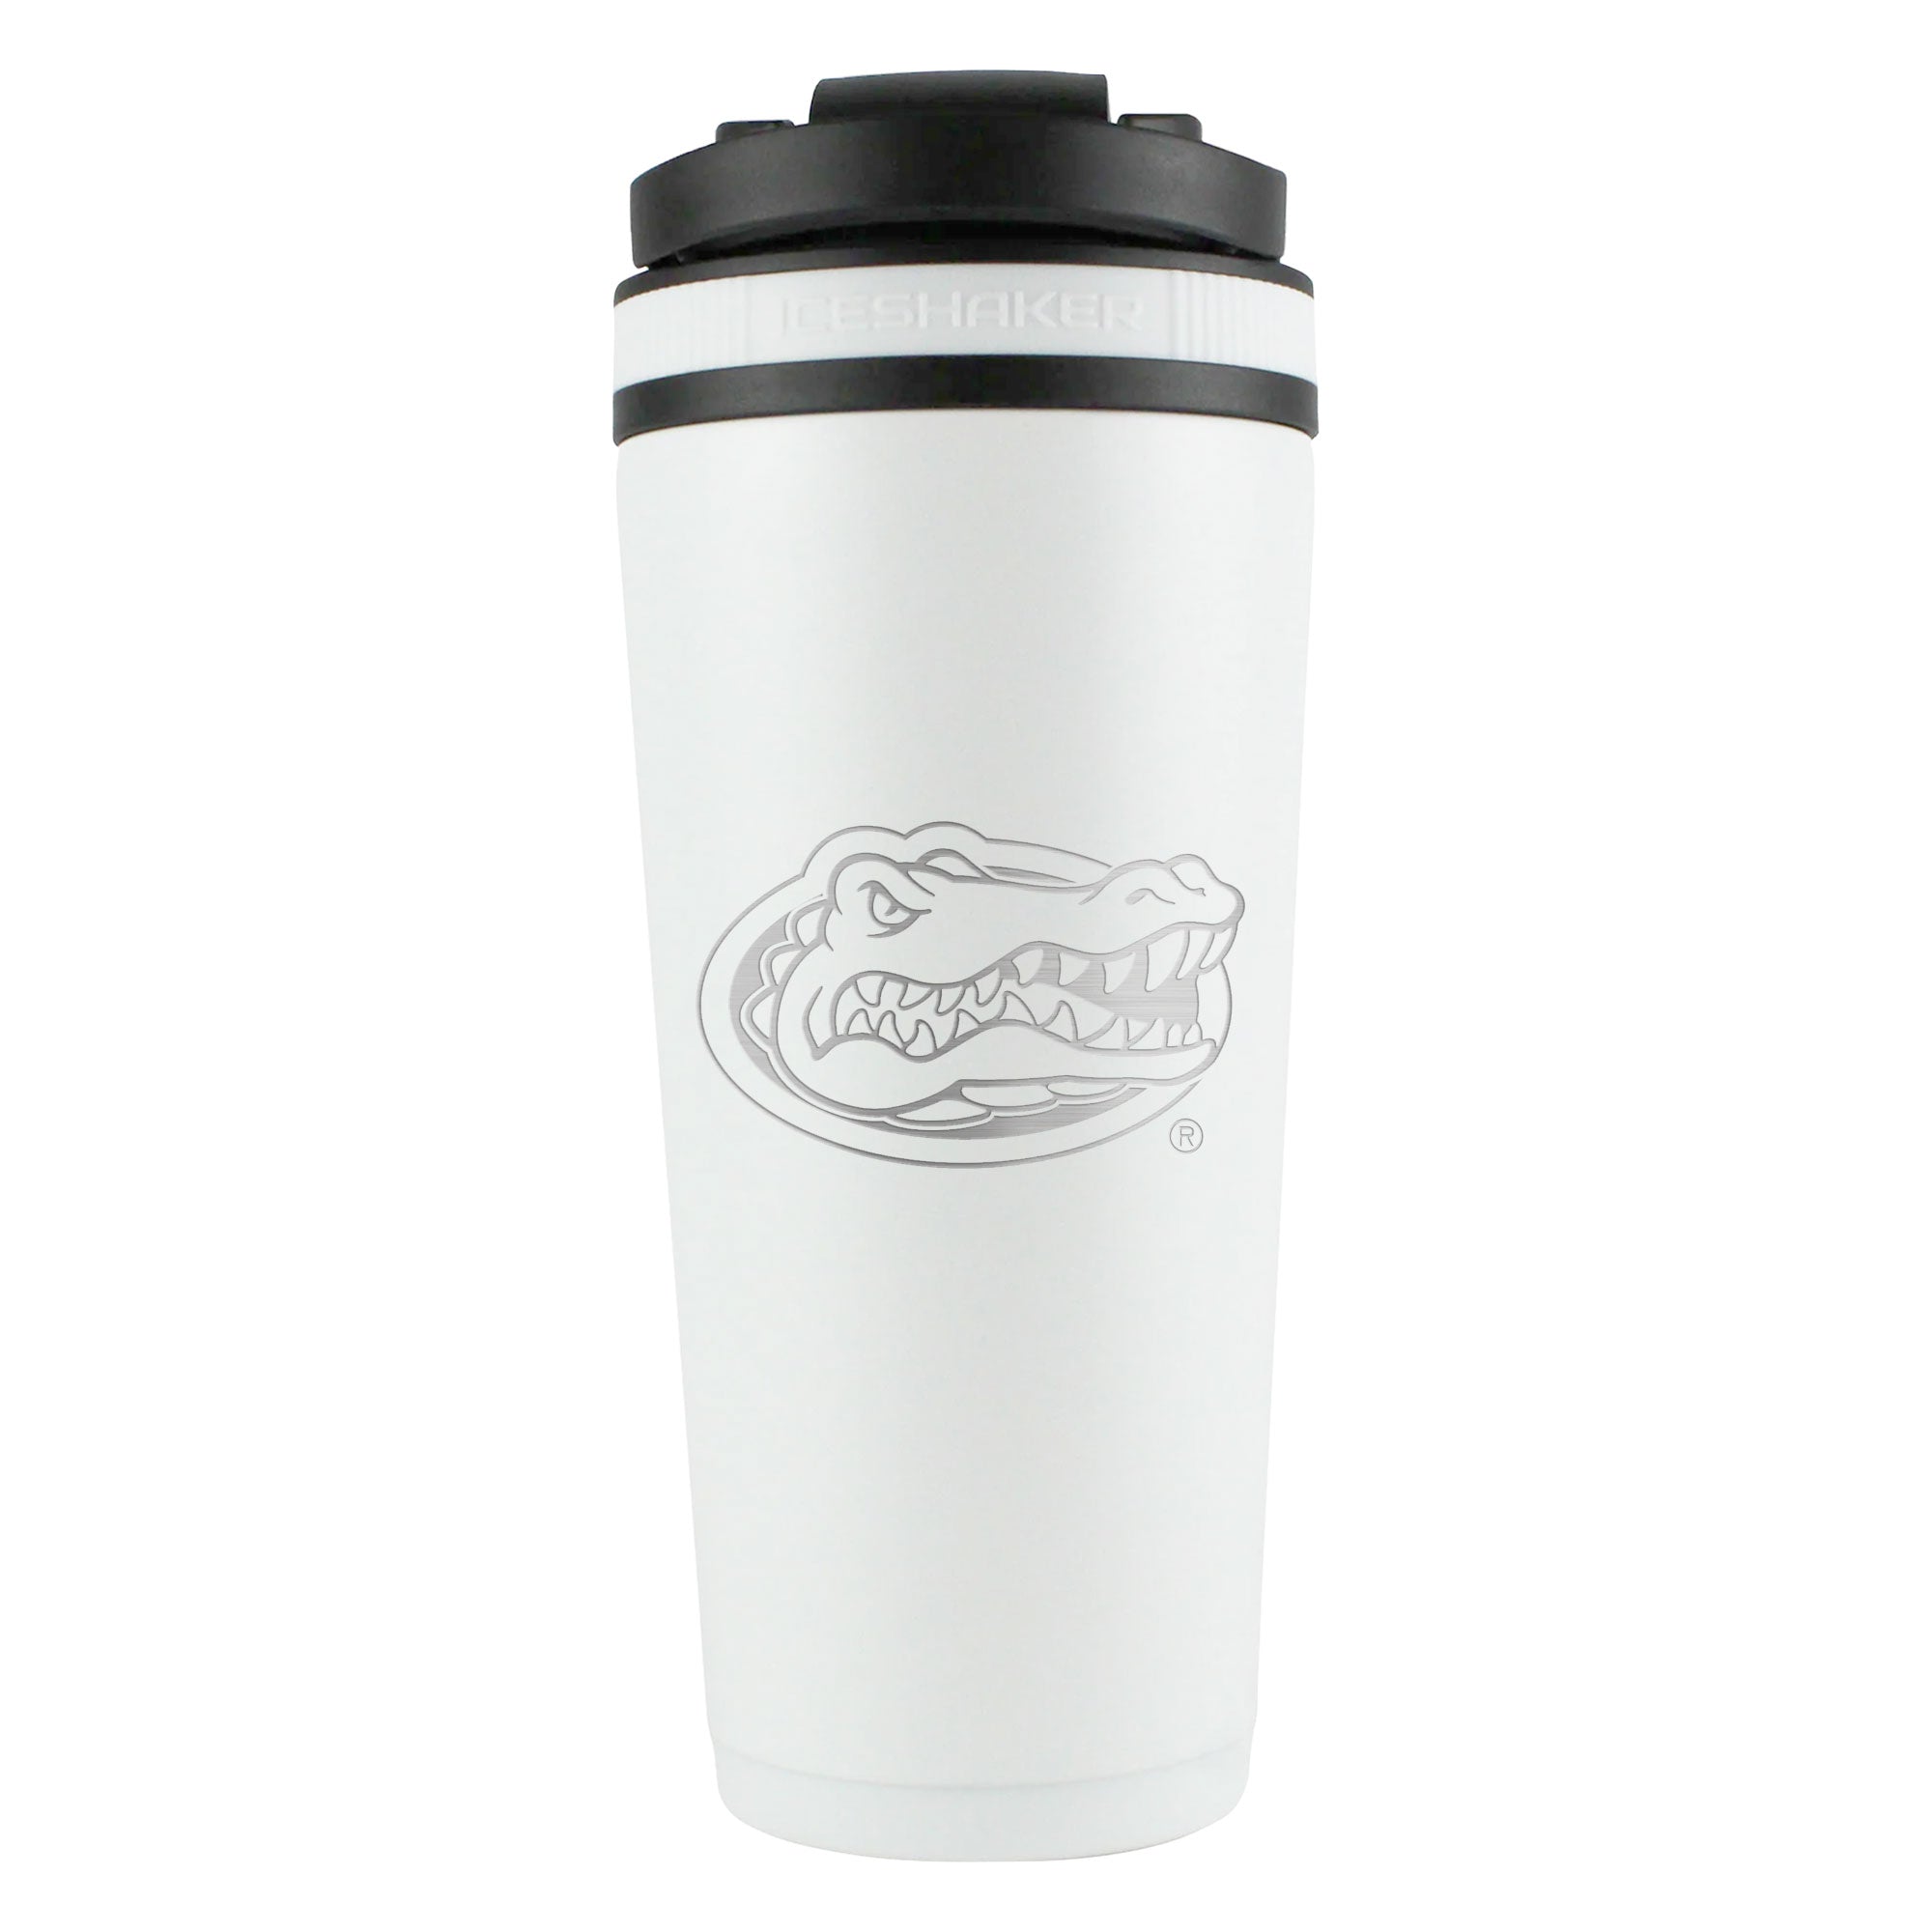 Officially Licensed University of Florida 26oz Ice Shaker